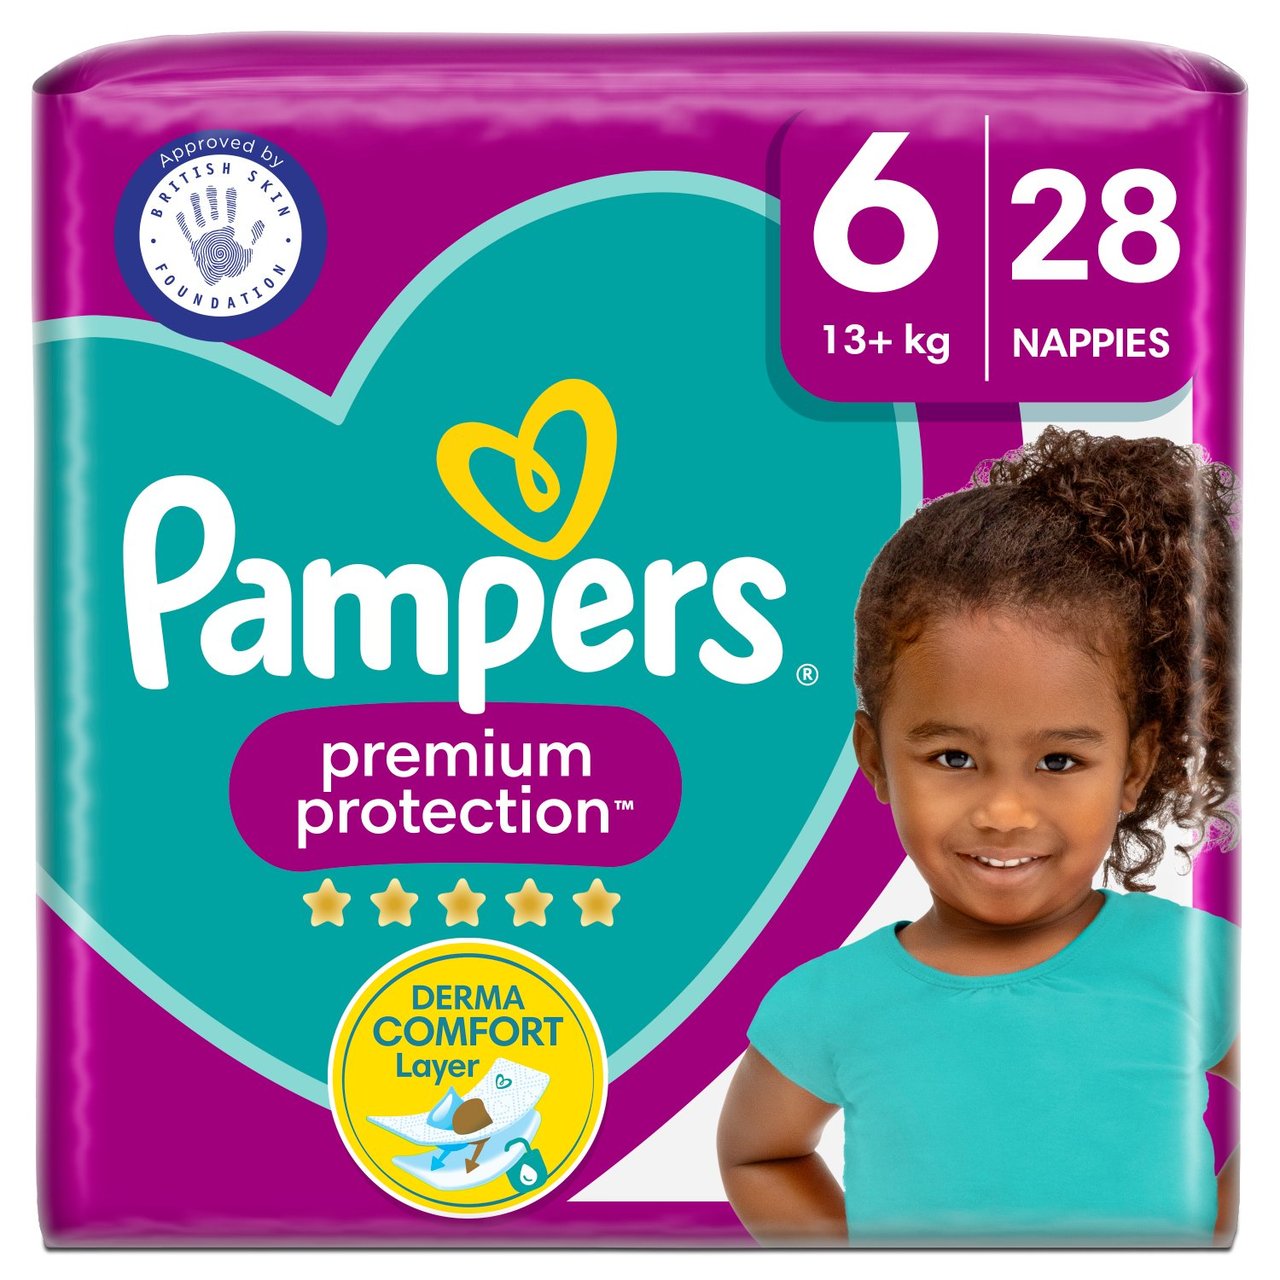 Pampers Baby-Dry Nappy Pants Size 8, 22 Nappies, 19kg+, Essential